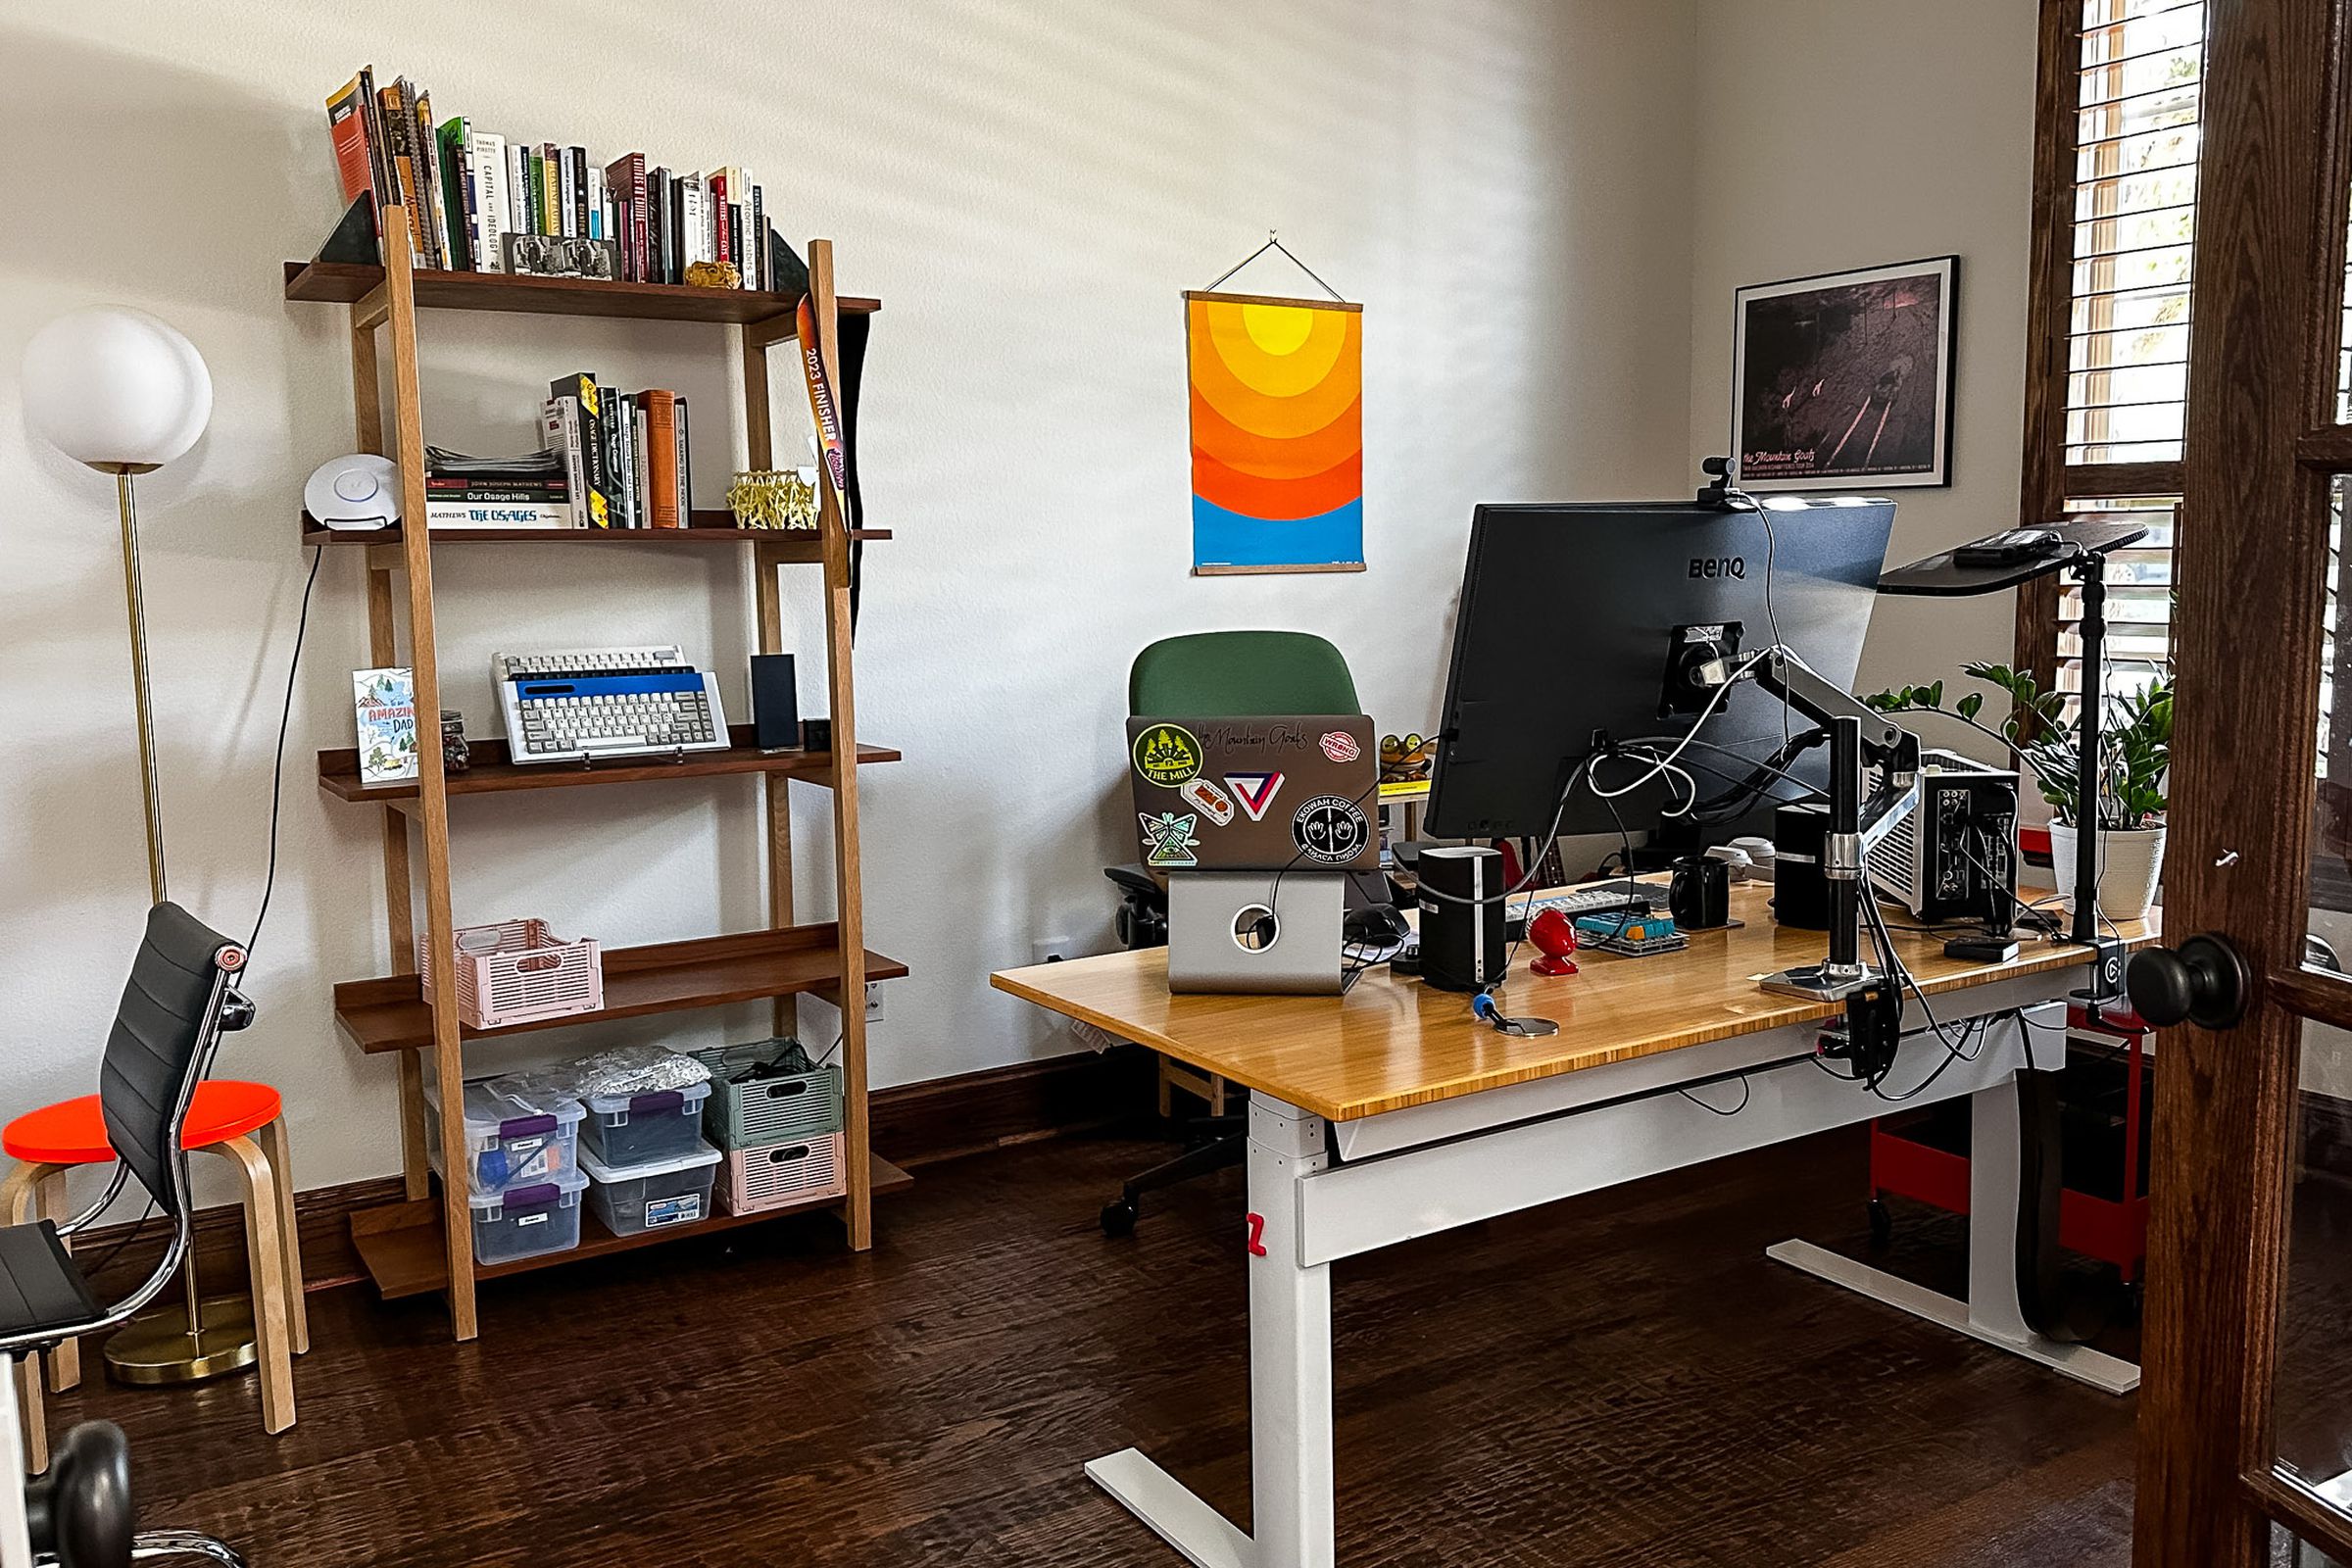 Desk and bookcase, with window at right.